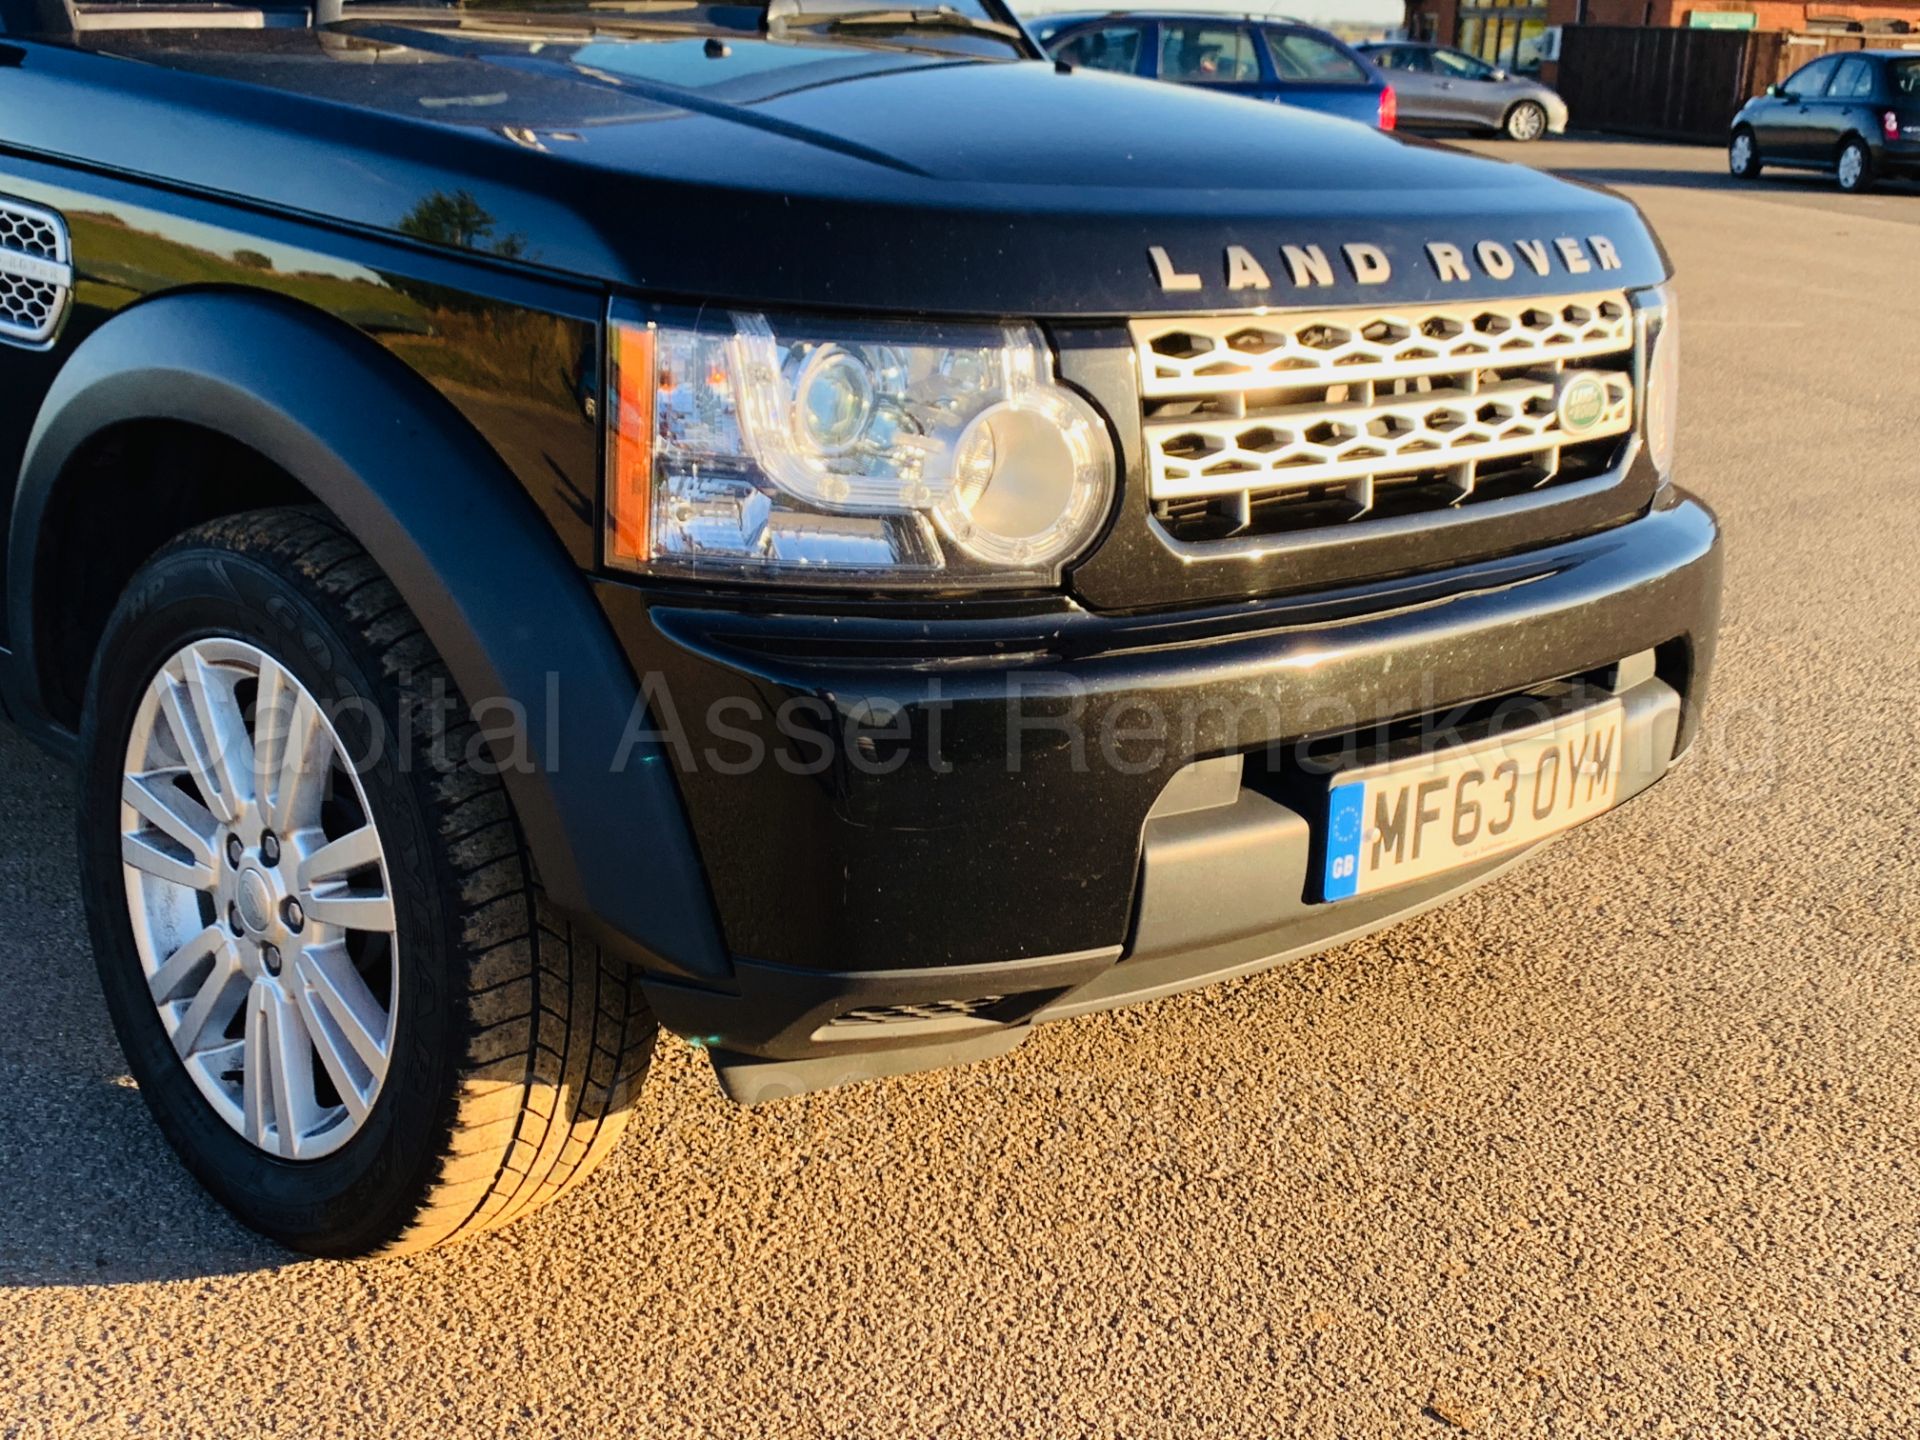 LAND ROVER DISCOVERY 4 **COMMERCIAL** (2014 MODEL) '3.0 SDV6 - 255 BHP - 8 SPEED AUTO' *HUGE SPEC* - Image 13 of 47